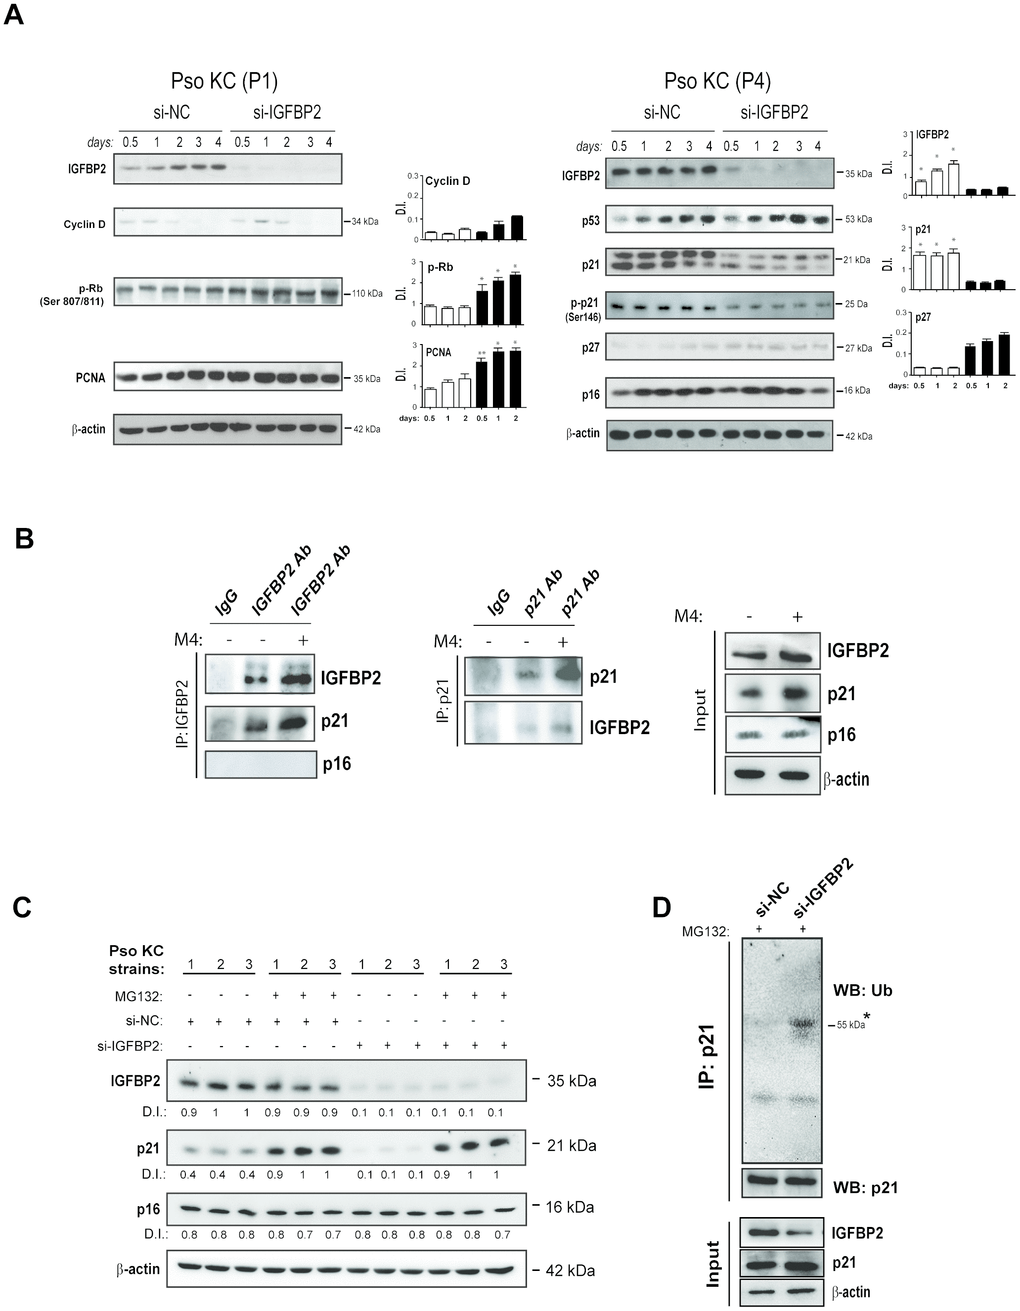 IGFBP2 interacts with p21 and protects it from ubiquitin-mediated proteasome degradation. (A) IGFBP2, p53, p21, p-p21, p27 and p16 protein expression was detected by WB analysis in pso KC cultured at passage 4 (P4, senescent cells) and silenced (si-IGFBP2) or not for IGFBP2 (si-NC) for different time points (right panels). Similarly, cyclin D, p-Rb and PCNA protein expression was detected in pso KC cultured at passage 1 (P1, pre-senescent cells) and silenced or not for IGFBP2 (left panels). In A and B, graphs show the mean ± SD of densitometric intensity (D.I.) of three independent experiments. *p ≤ 0.05, **p ≤ 0.01 as calculated by paired Student’s t test comparing si-IGFBP2 with si-NC. (B) Co-immunoprecipitation experiments were performed on protein lysates obtained from pso KC left untreated or treated by M4 for 6 hours and then immunoprecipitated with antibodies against IGFBP2 or goat IgG as negative control (IP: IGFBP2, left panel), and with p21 or mouse IgG (IP: p21, right panel). The immunoprecipitates were probed with anti-IGFBP2, -p21 or –p16 antibodies, as shown in left and right panels. WB analysis was also performed on cell lysates (Input) to detect IGFBP2 and p21 levels. Figures are representative of three independent experiments. (C) Protein extracts of three distinct pso KC strains, transfected with si-IGFBP2 or si-NC for 24 h and then treated or not with 20 μM of the proteasome inhibitor MG132 for 6 h, were subjected to WB for the detection of IGFBP2, p21 and p16 expression. WB panels are representative of three independent experiments and D.I. indicates values of densitometric intensity. (D) Endogenous p21 was immunoprecipitated by protein lysates obtained from pso KC cultures silenced or not for IGFBP2 for 24 h and treated with 20 μM of MG132 for 6 hours. WB analysis was performed for the detection of p21 ubiquitination by using anti-ubiquitin antibody. WB was also performed on cell lysates (Input) to detect IGFBP2 and p21 levels, as well as β-actin as loading control.